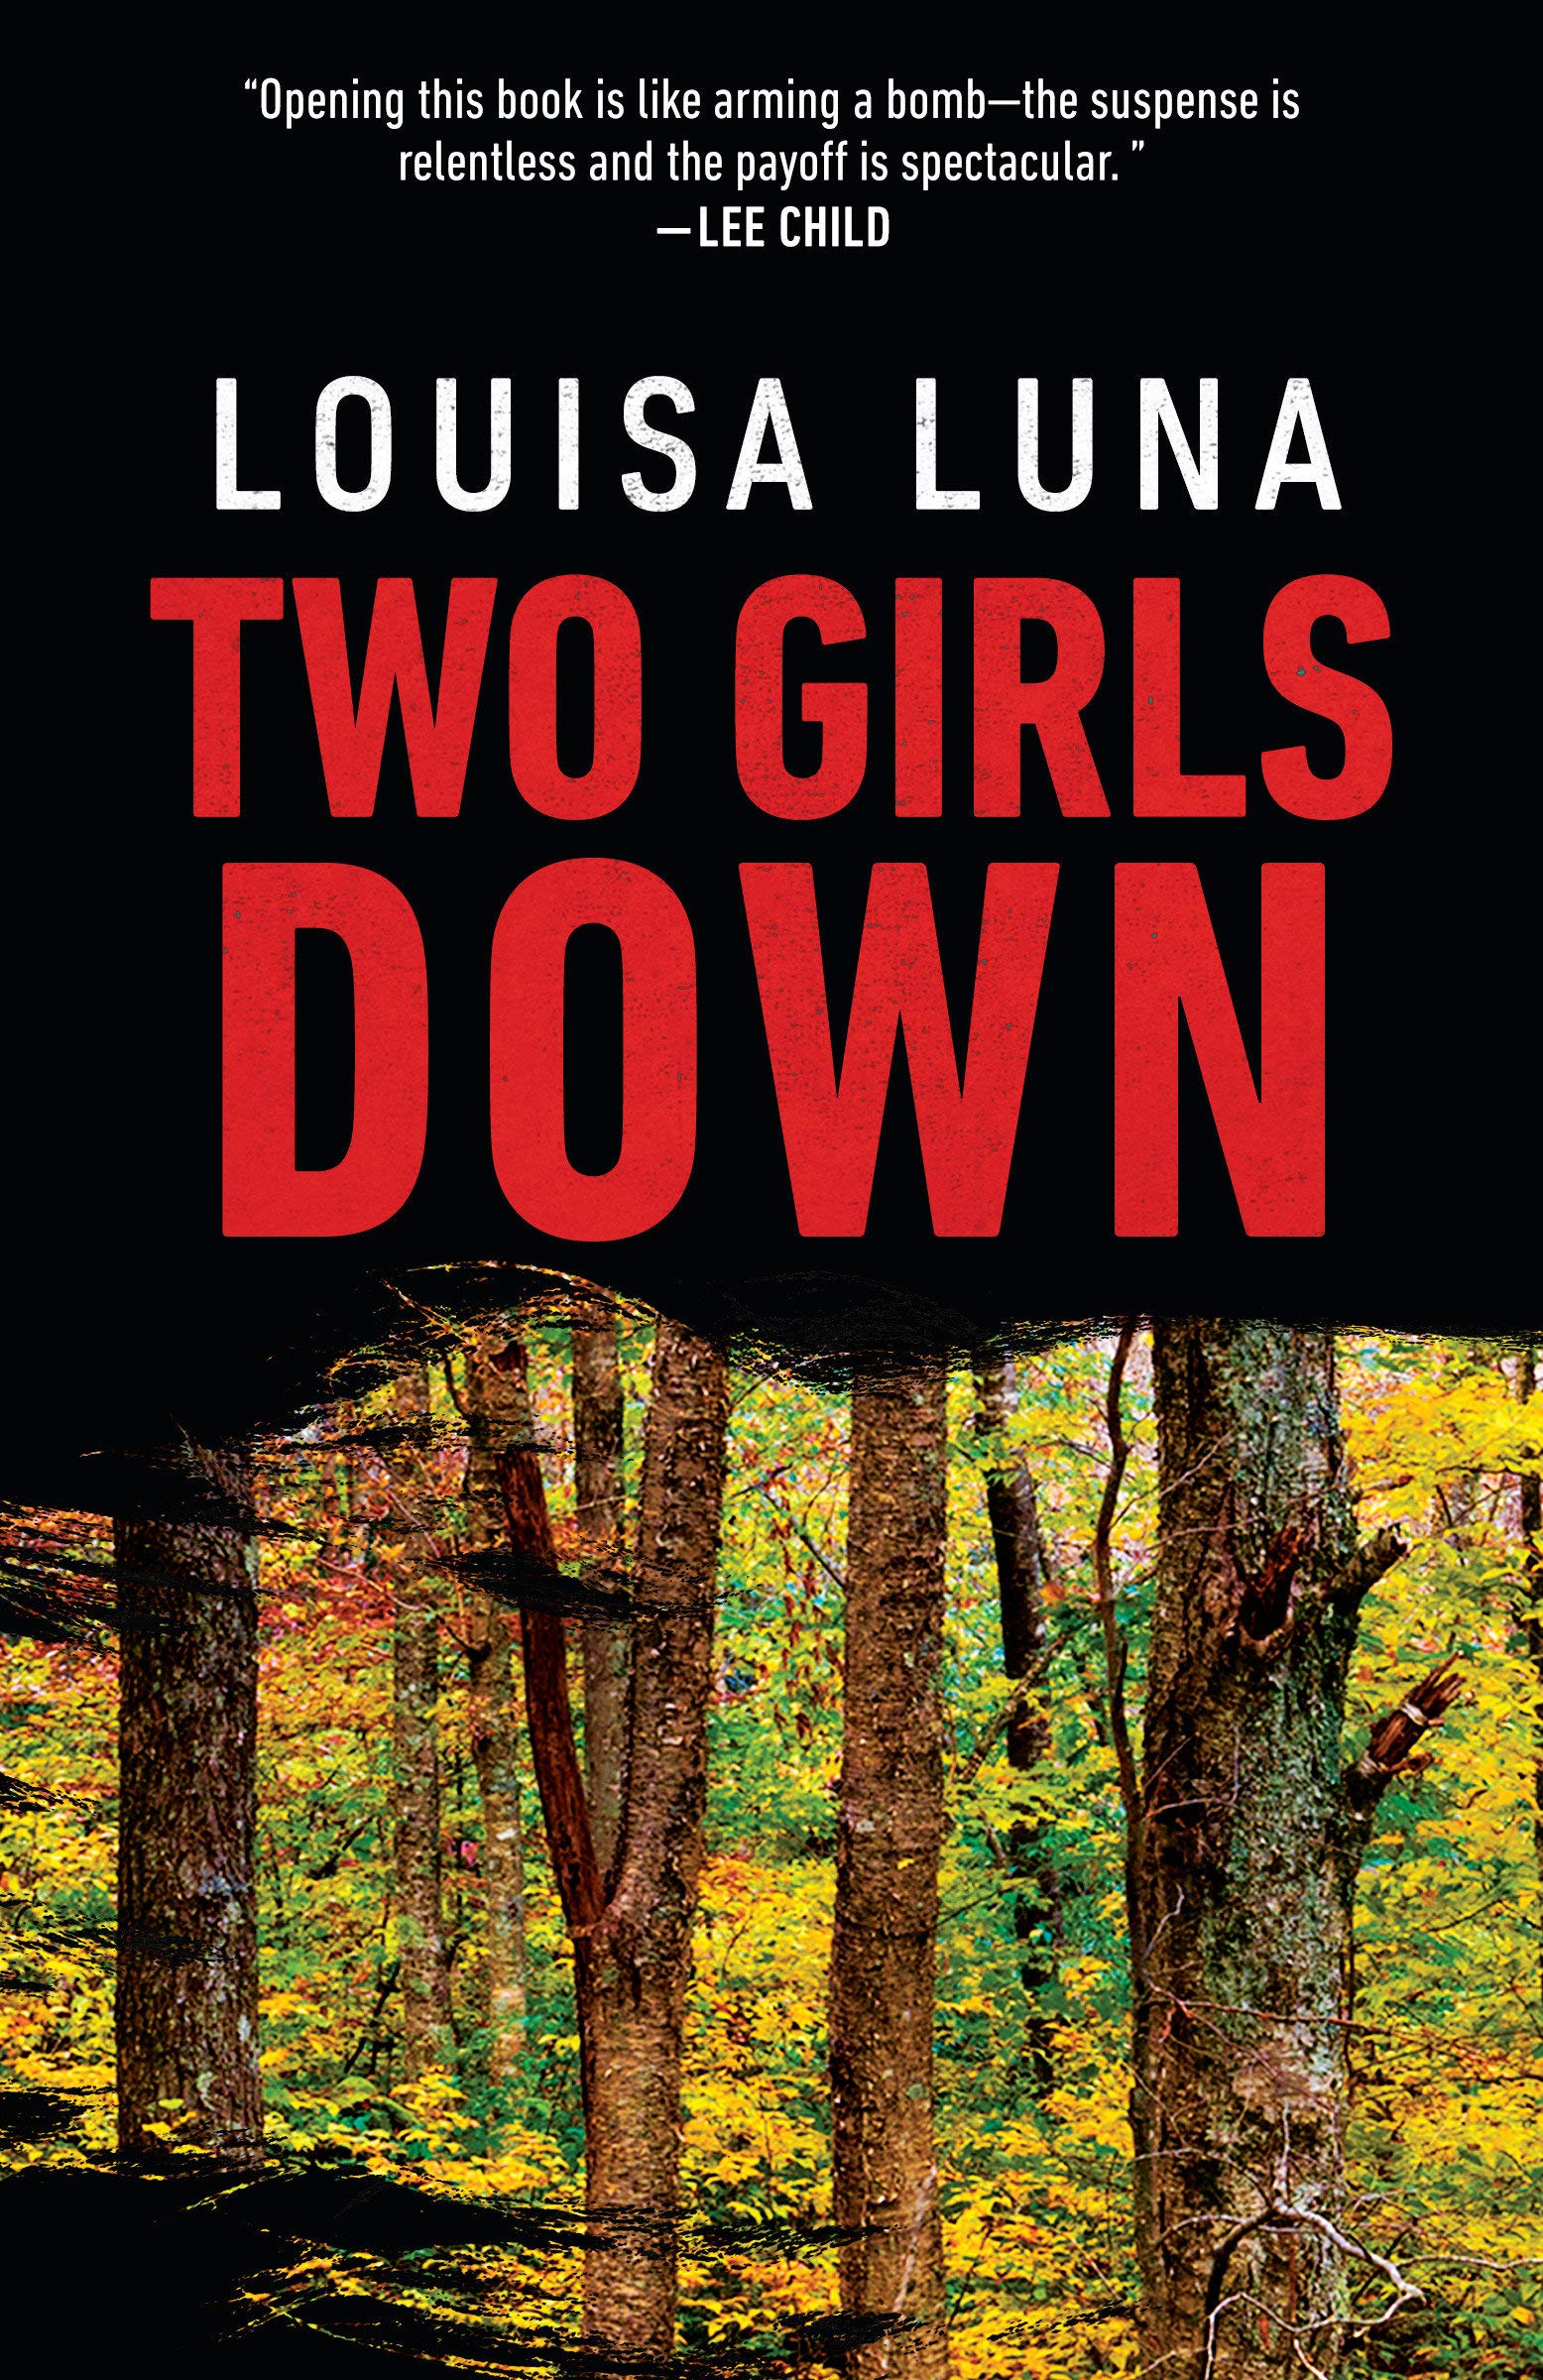 Image for "Two Girls Down"